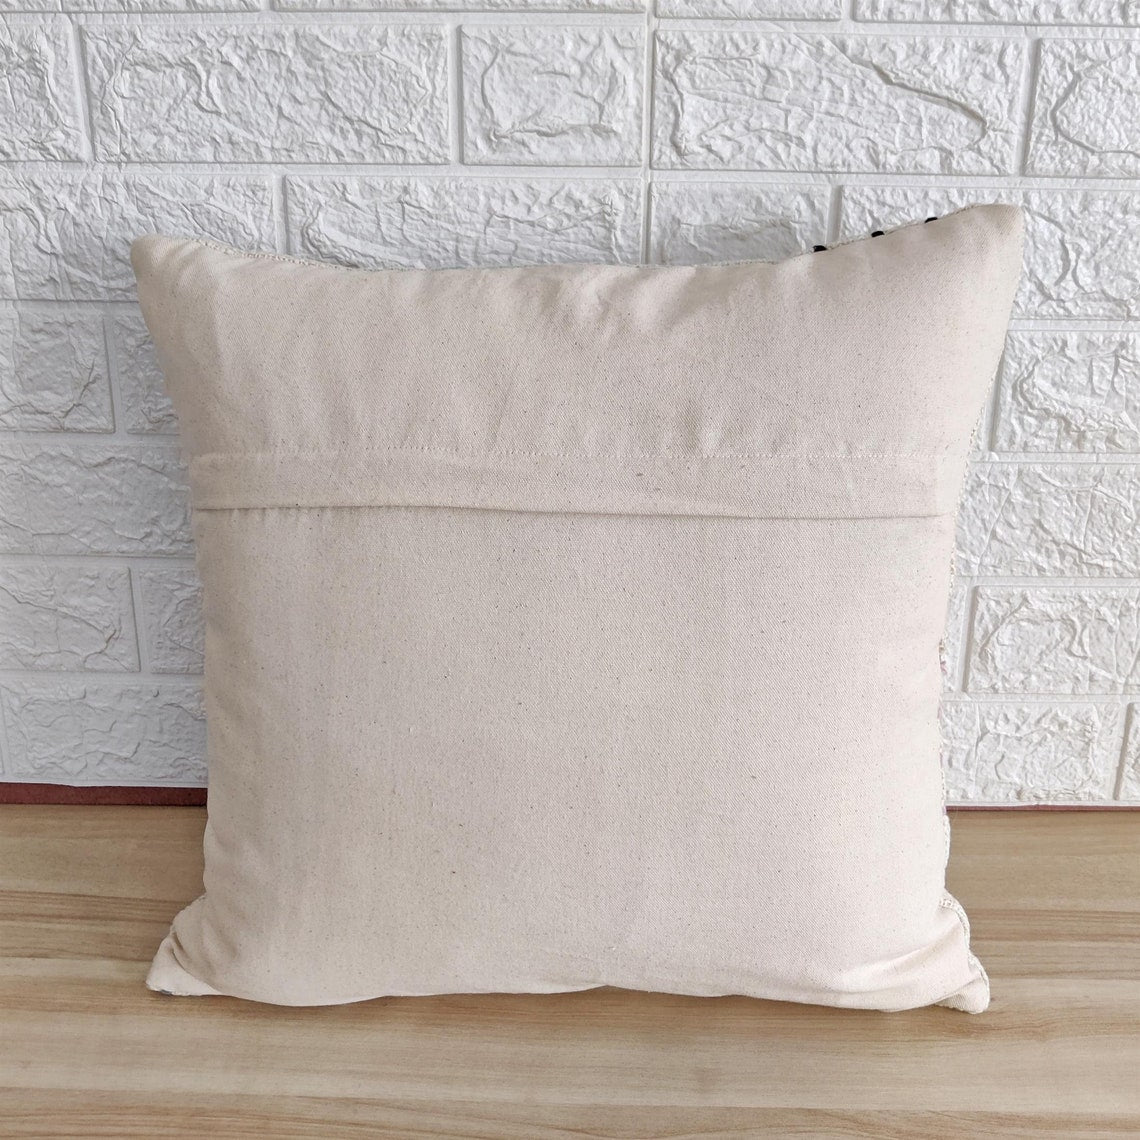 Ivory and Red Tufted Cotton Cushion Cover